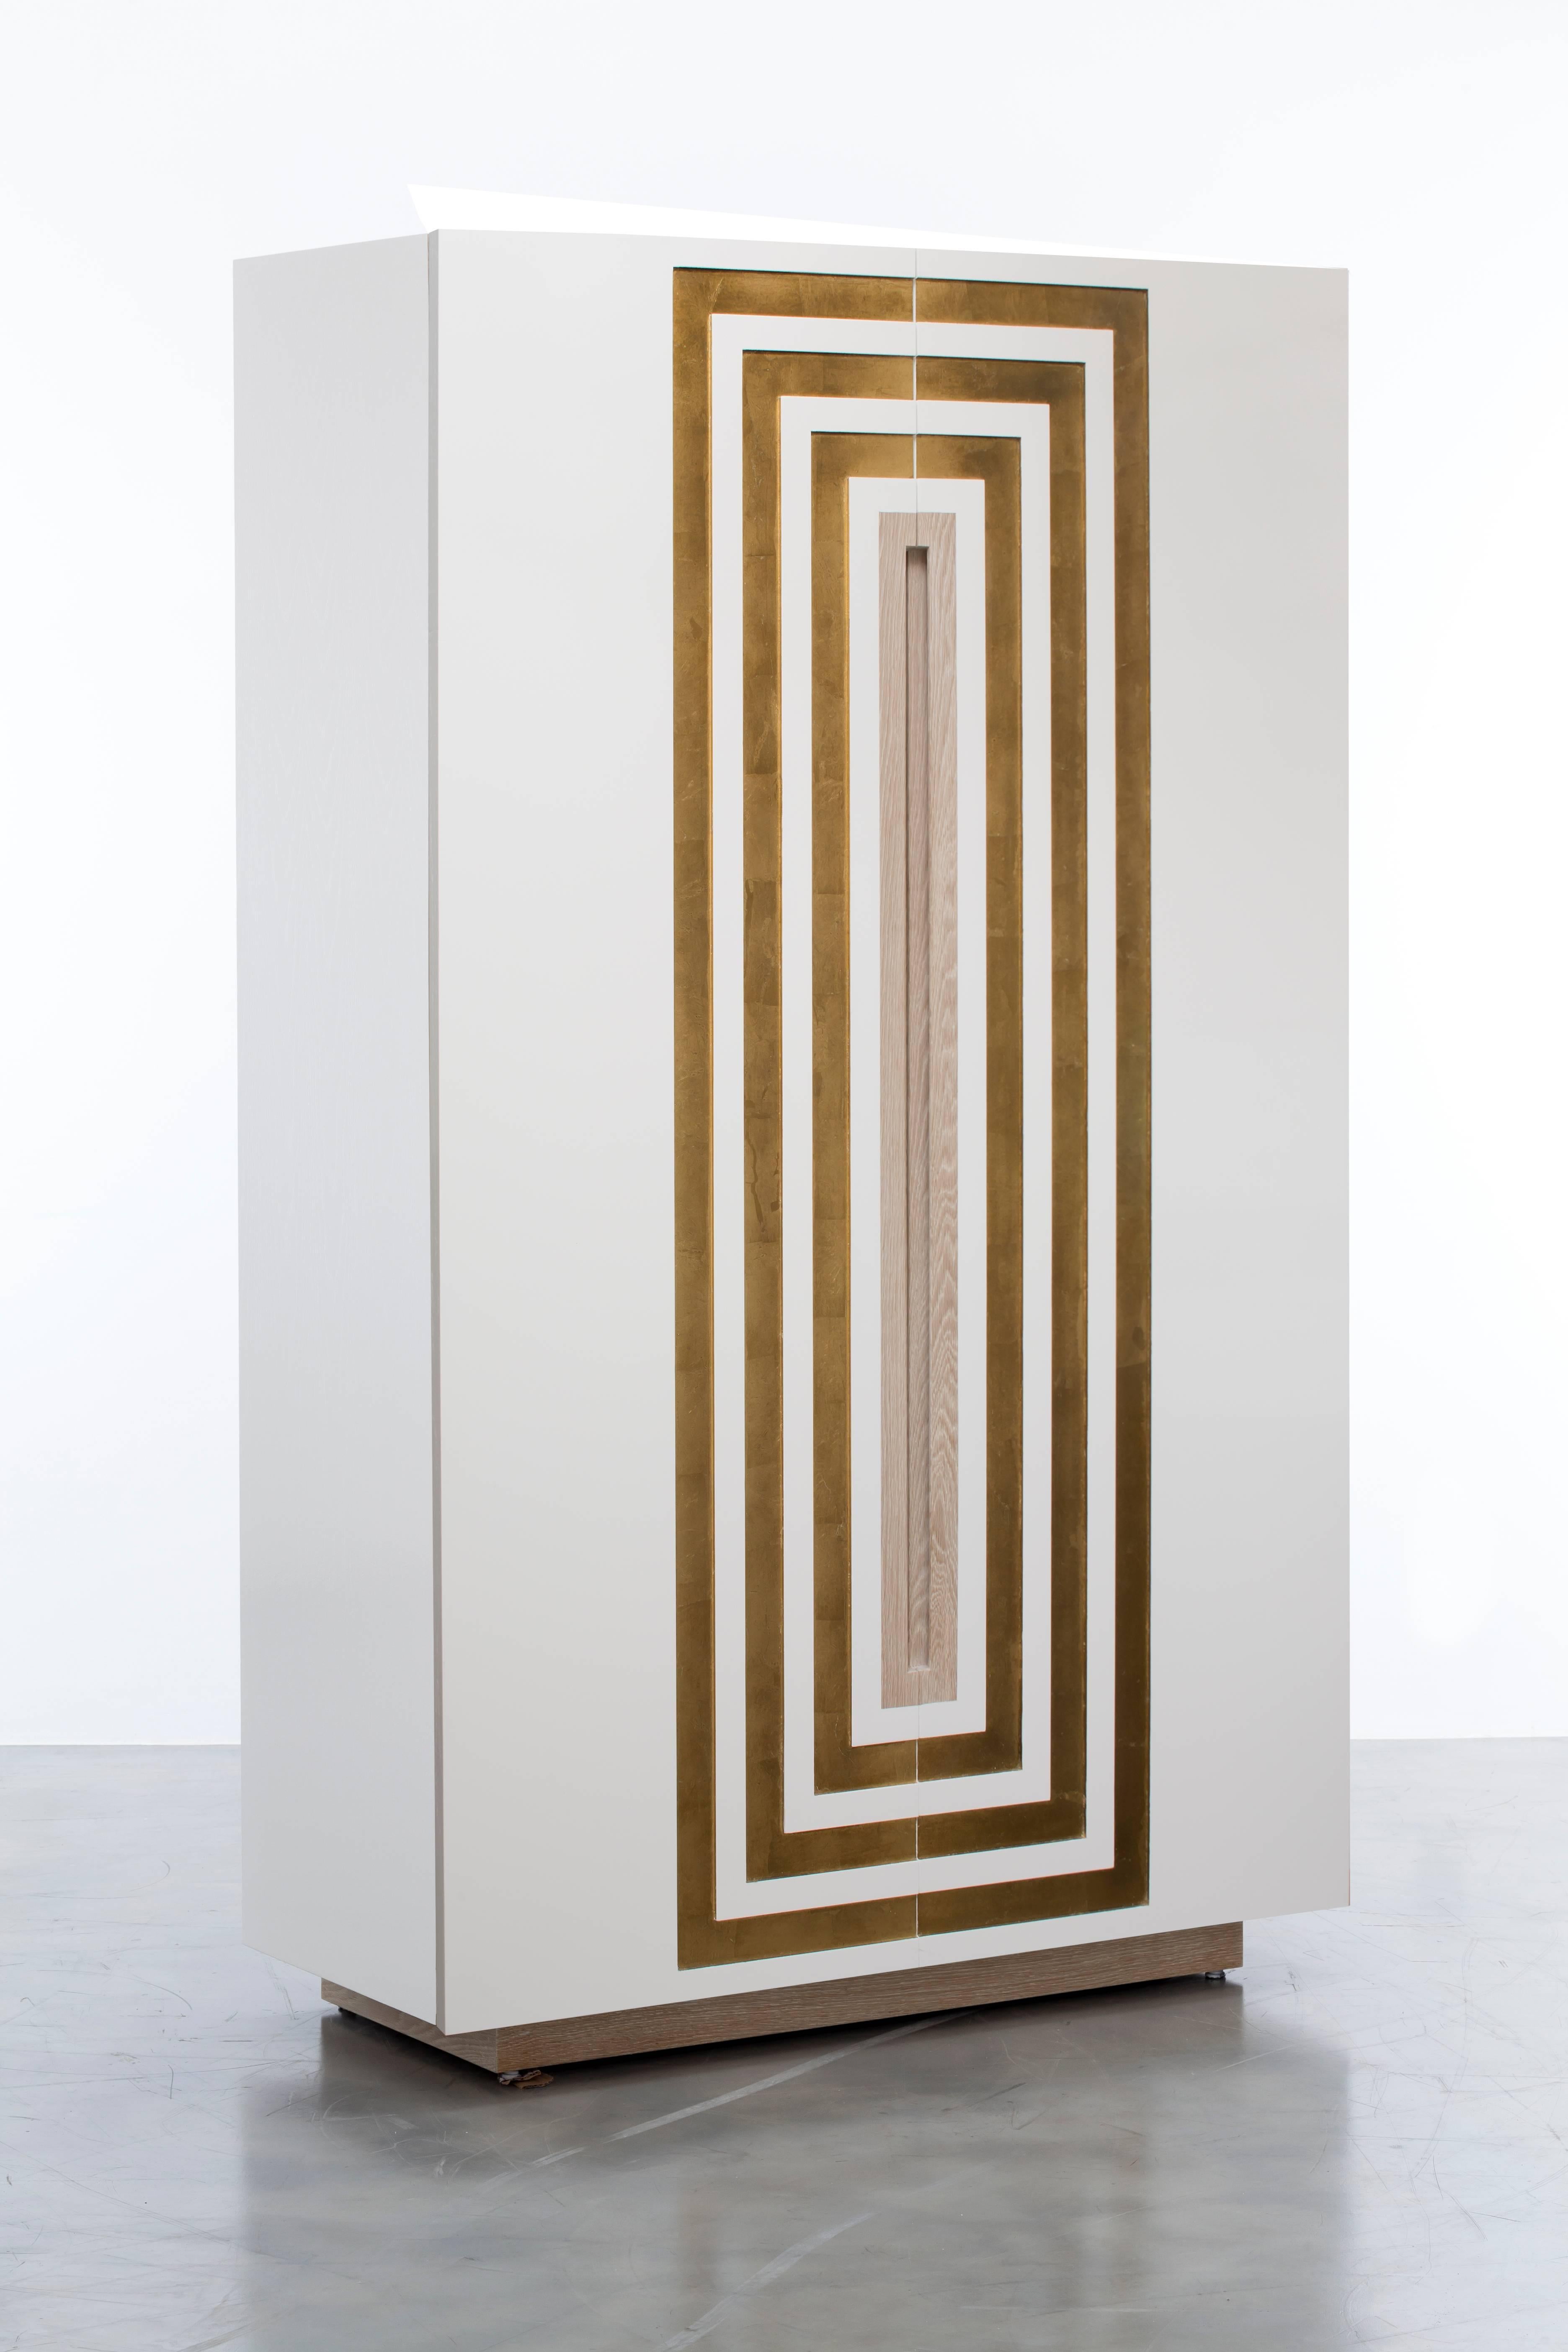 CELESTE BAR CABINET - Modern White Lacquer Oak Body Cabinet with Gold Leaf Inlay

The Celeste Bar Cabinet is a stunning and elegant piece of furniture that features a white lacquer over oak body with a beautiful gold leaf inlay detail, adding a